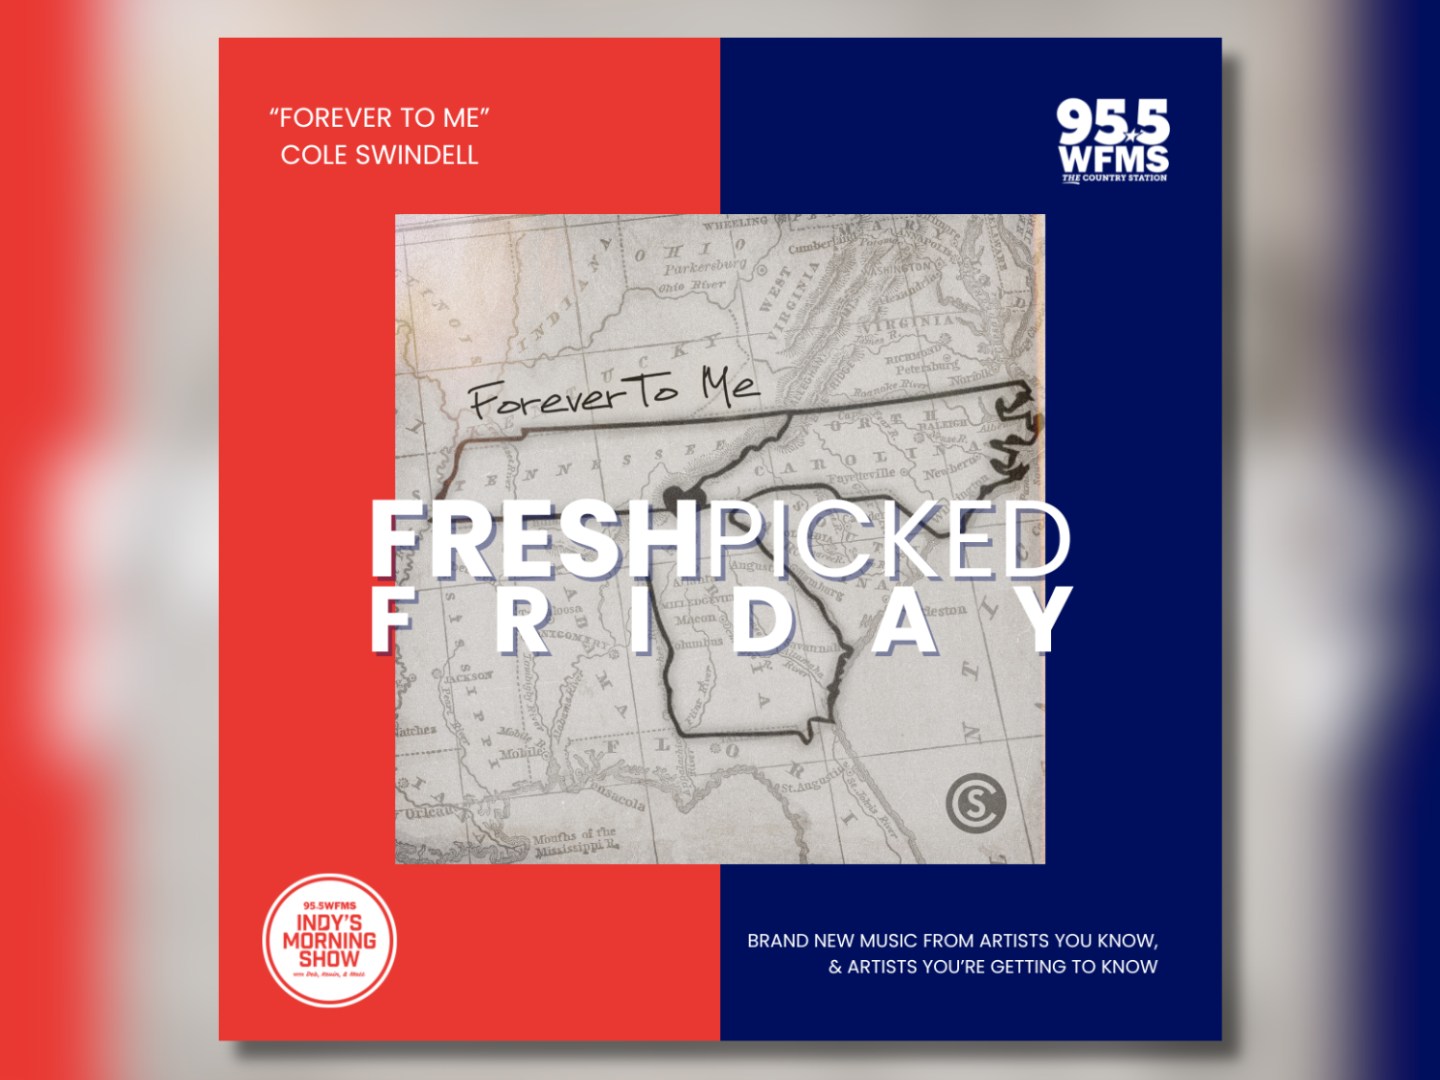 Fresh Picked Friday – Cole Swindell “Forever To Me”